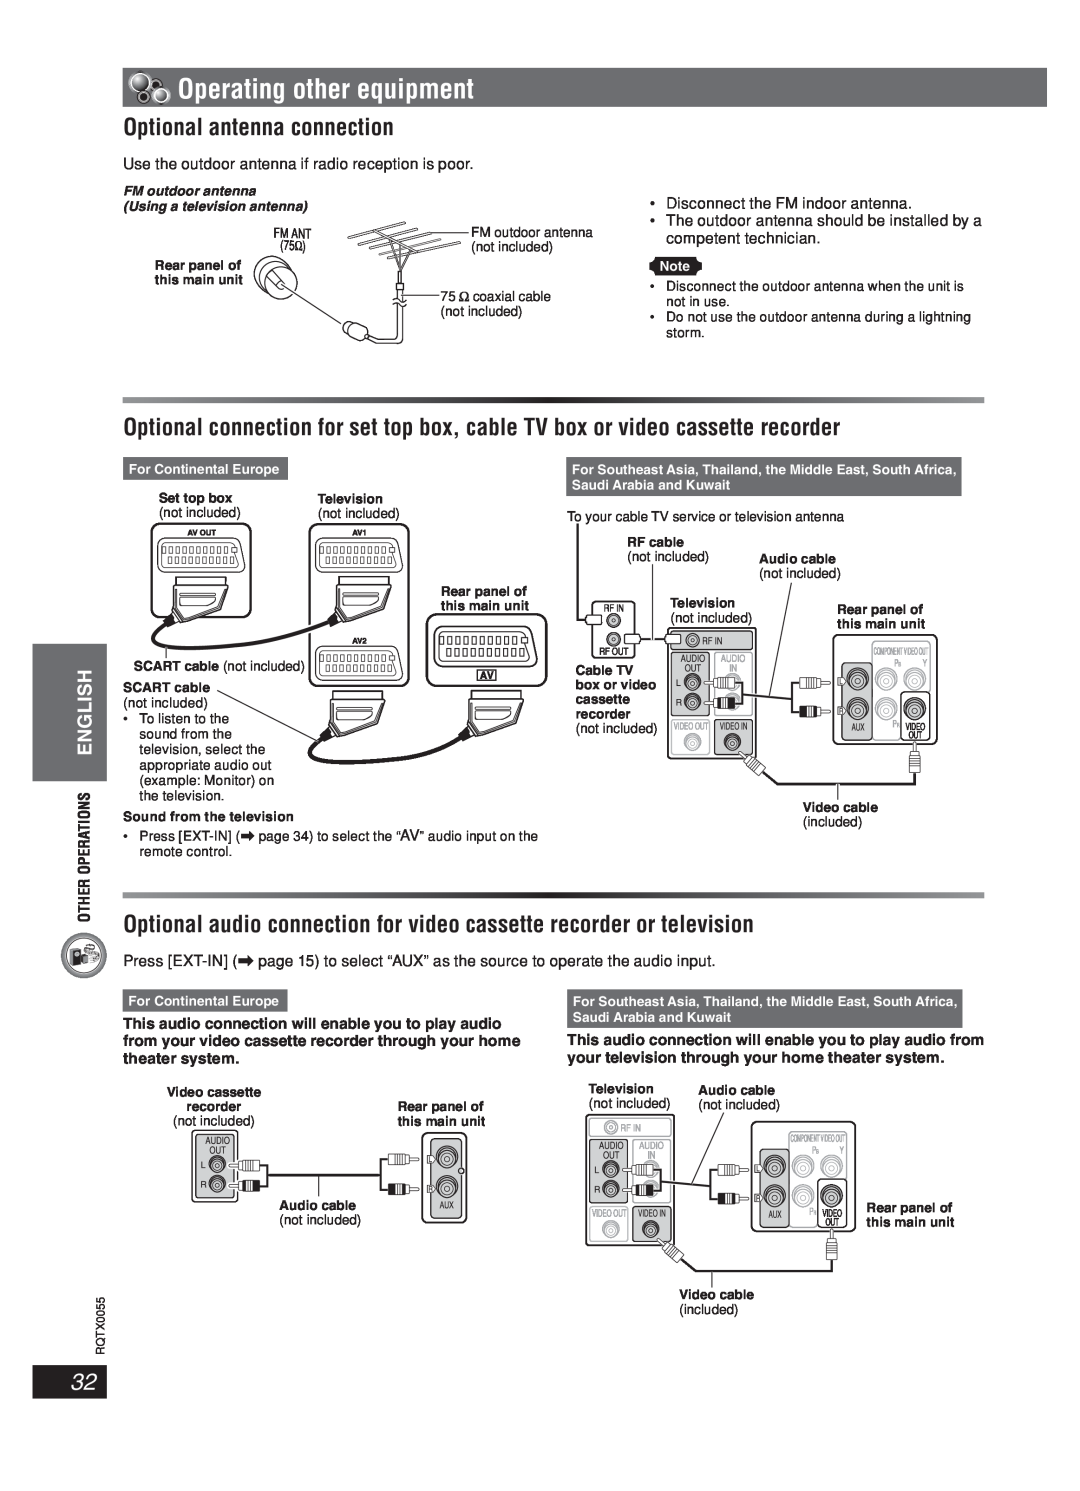 Panasonic SC-PT 250 manual Operating other equipment, Optional antenna connection 